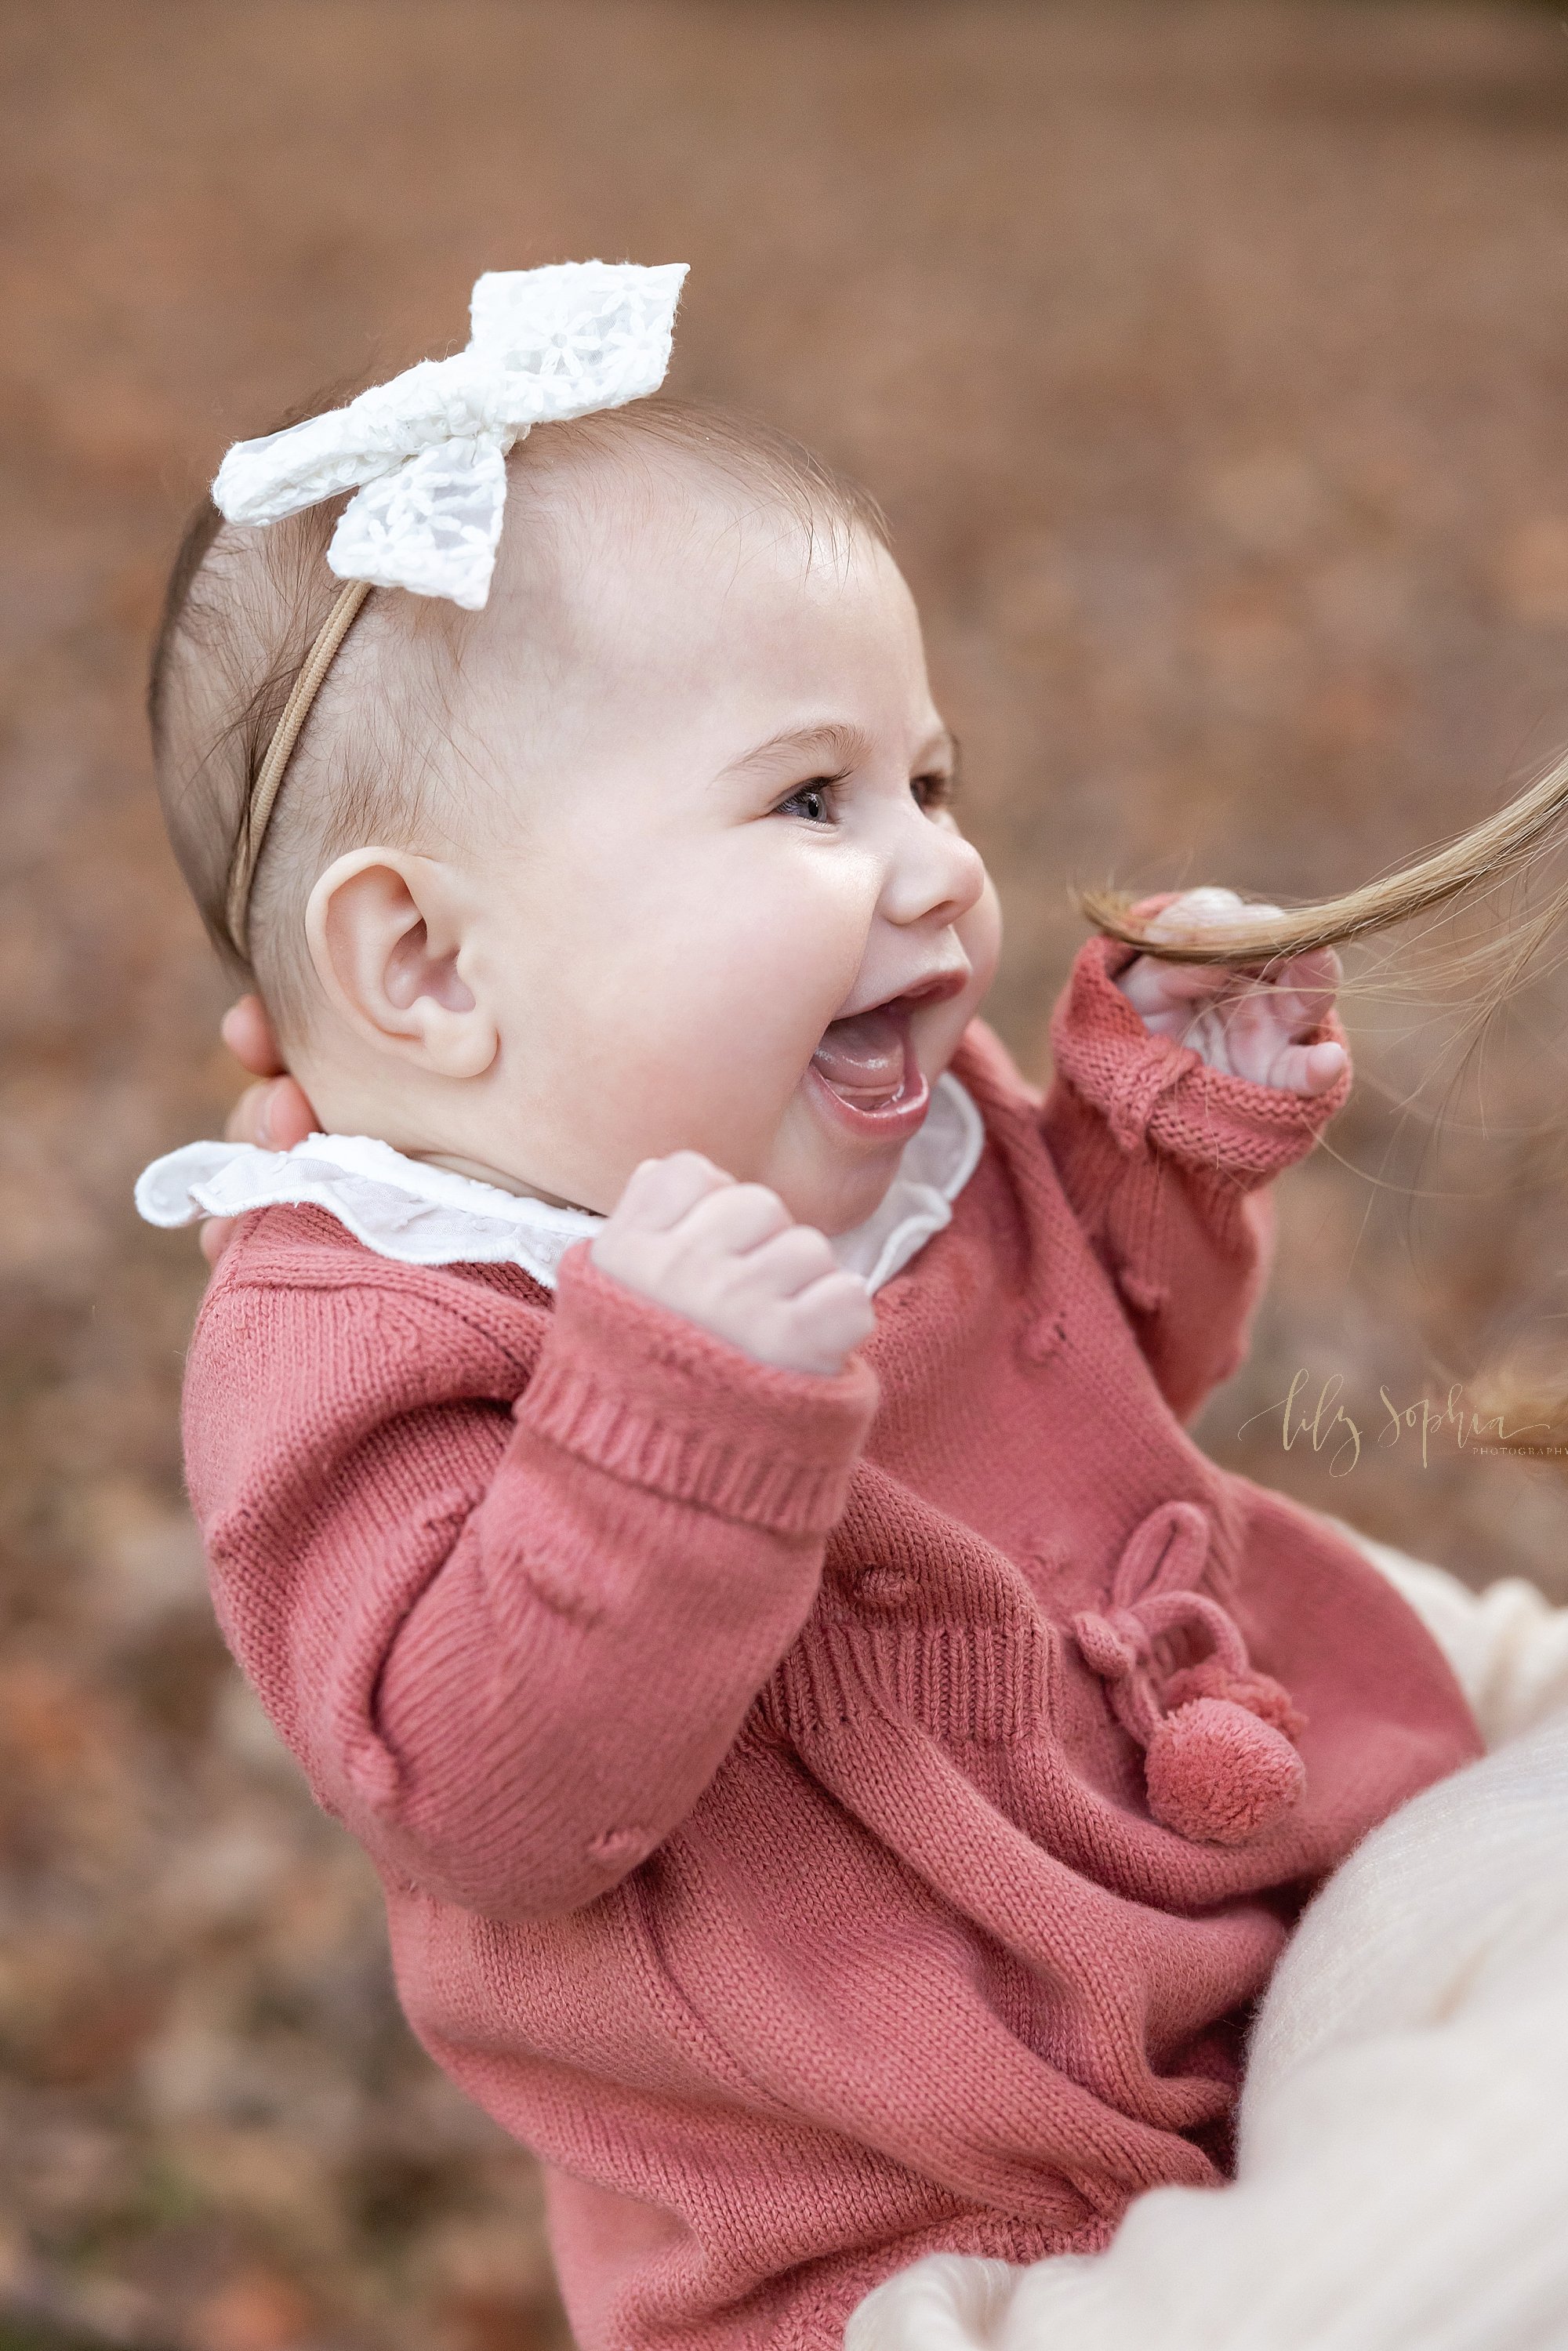  Close-up portrait of a happy baby girl as she is held in her mother’s arms and the baby grabs her hair taken during fall at sunset in a park near Atlanta. 